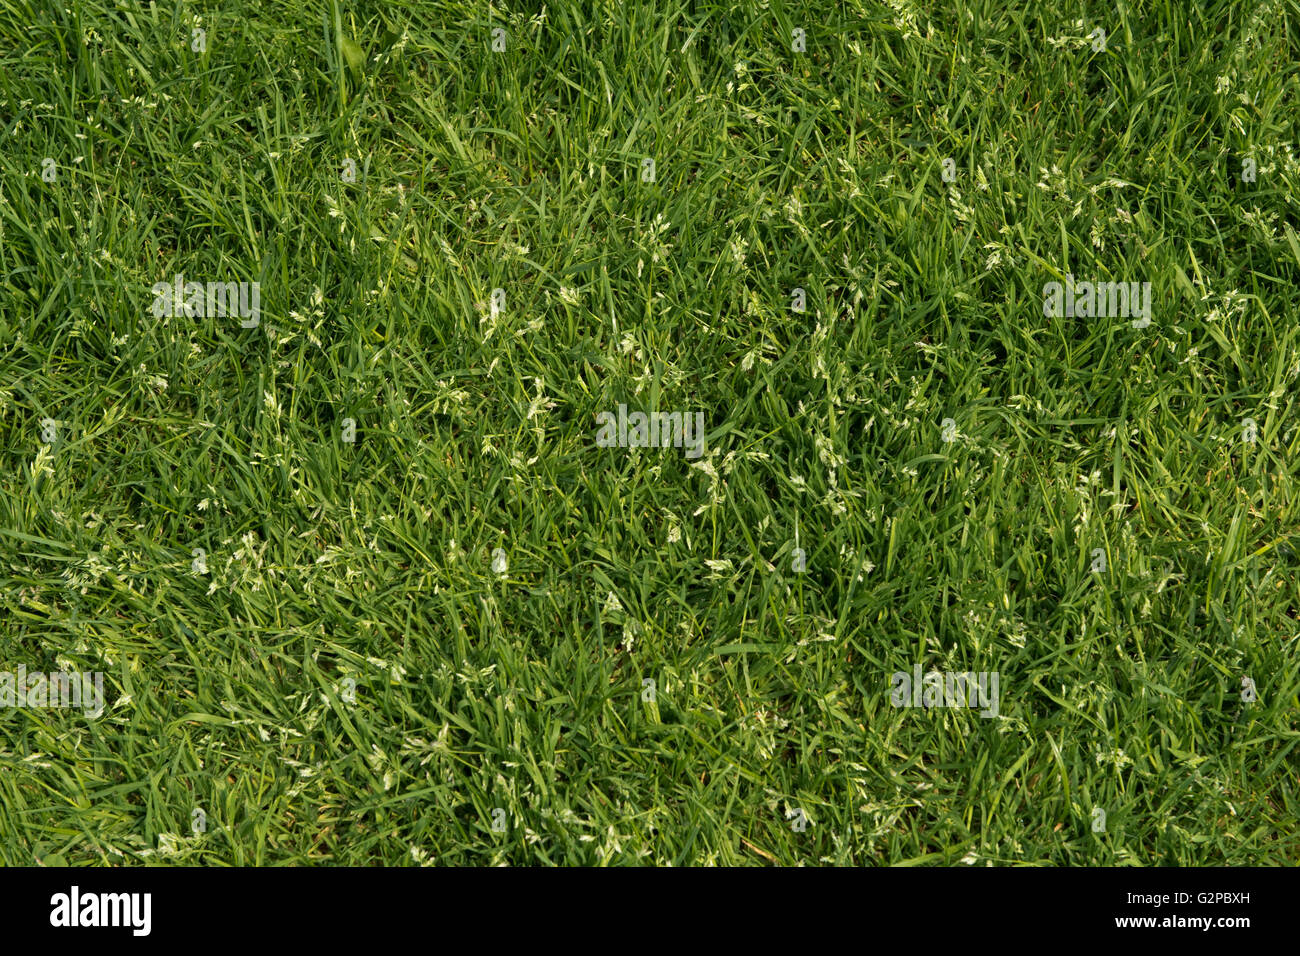 Meadow grass, Poa sp., stunted grasses coming into flower in a garden lawn Stock Photo